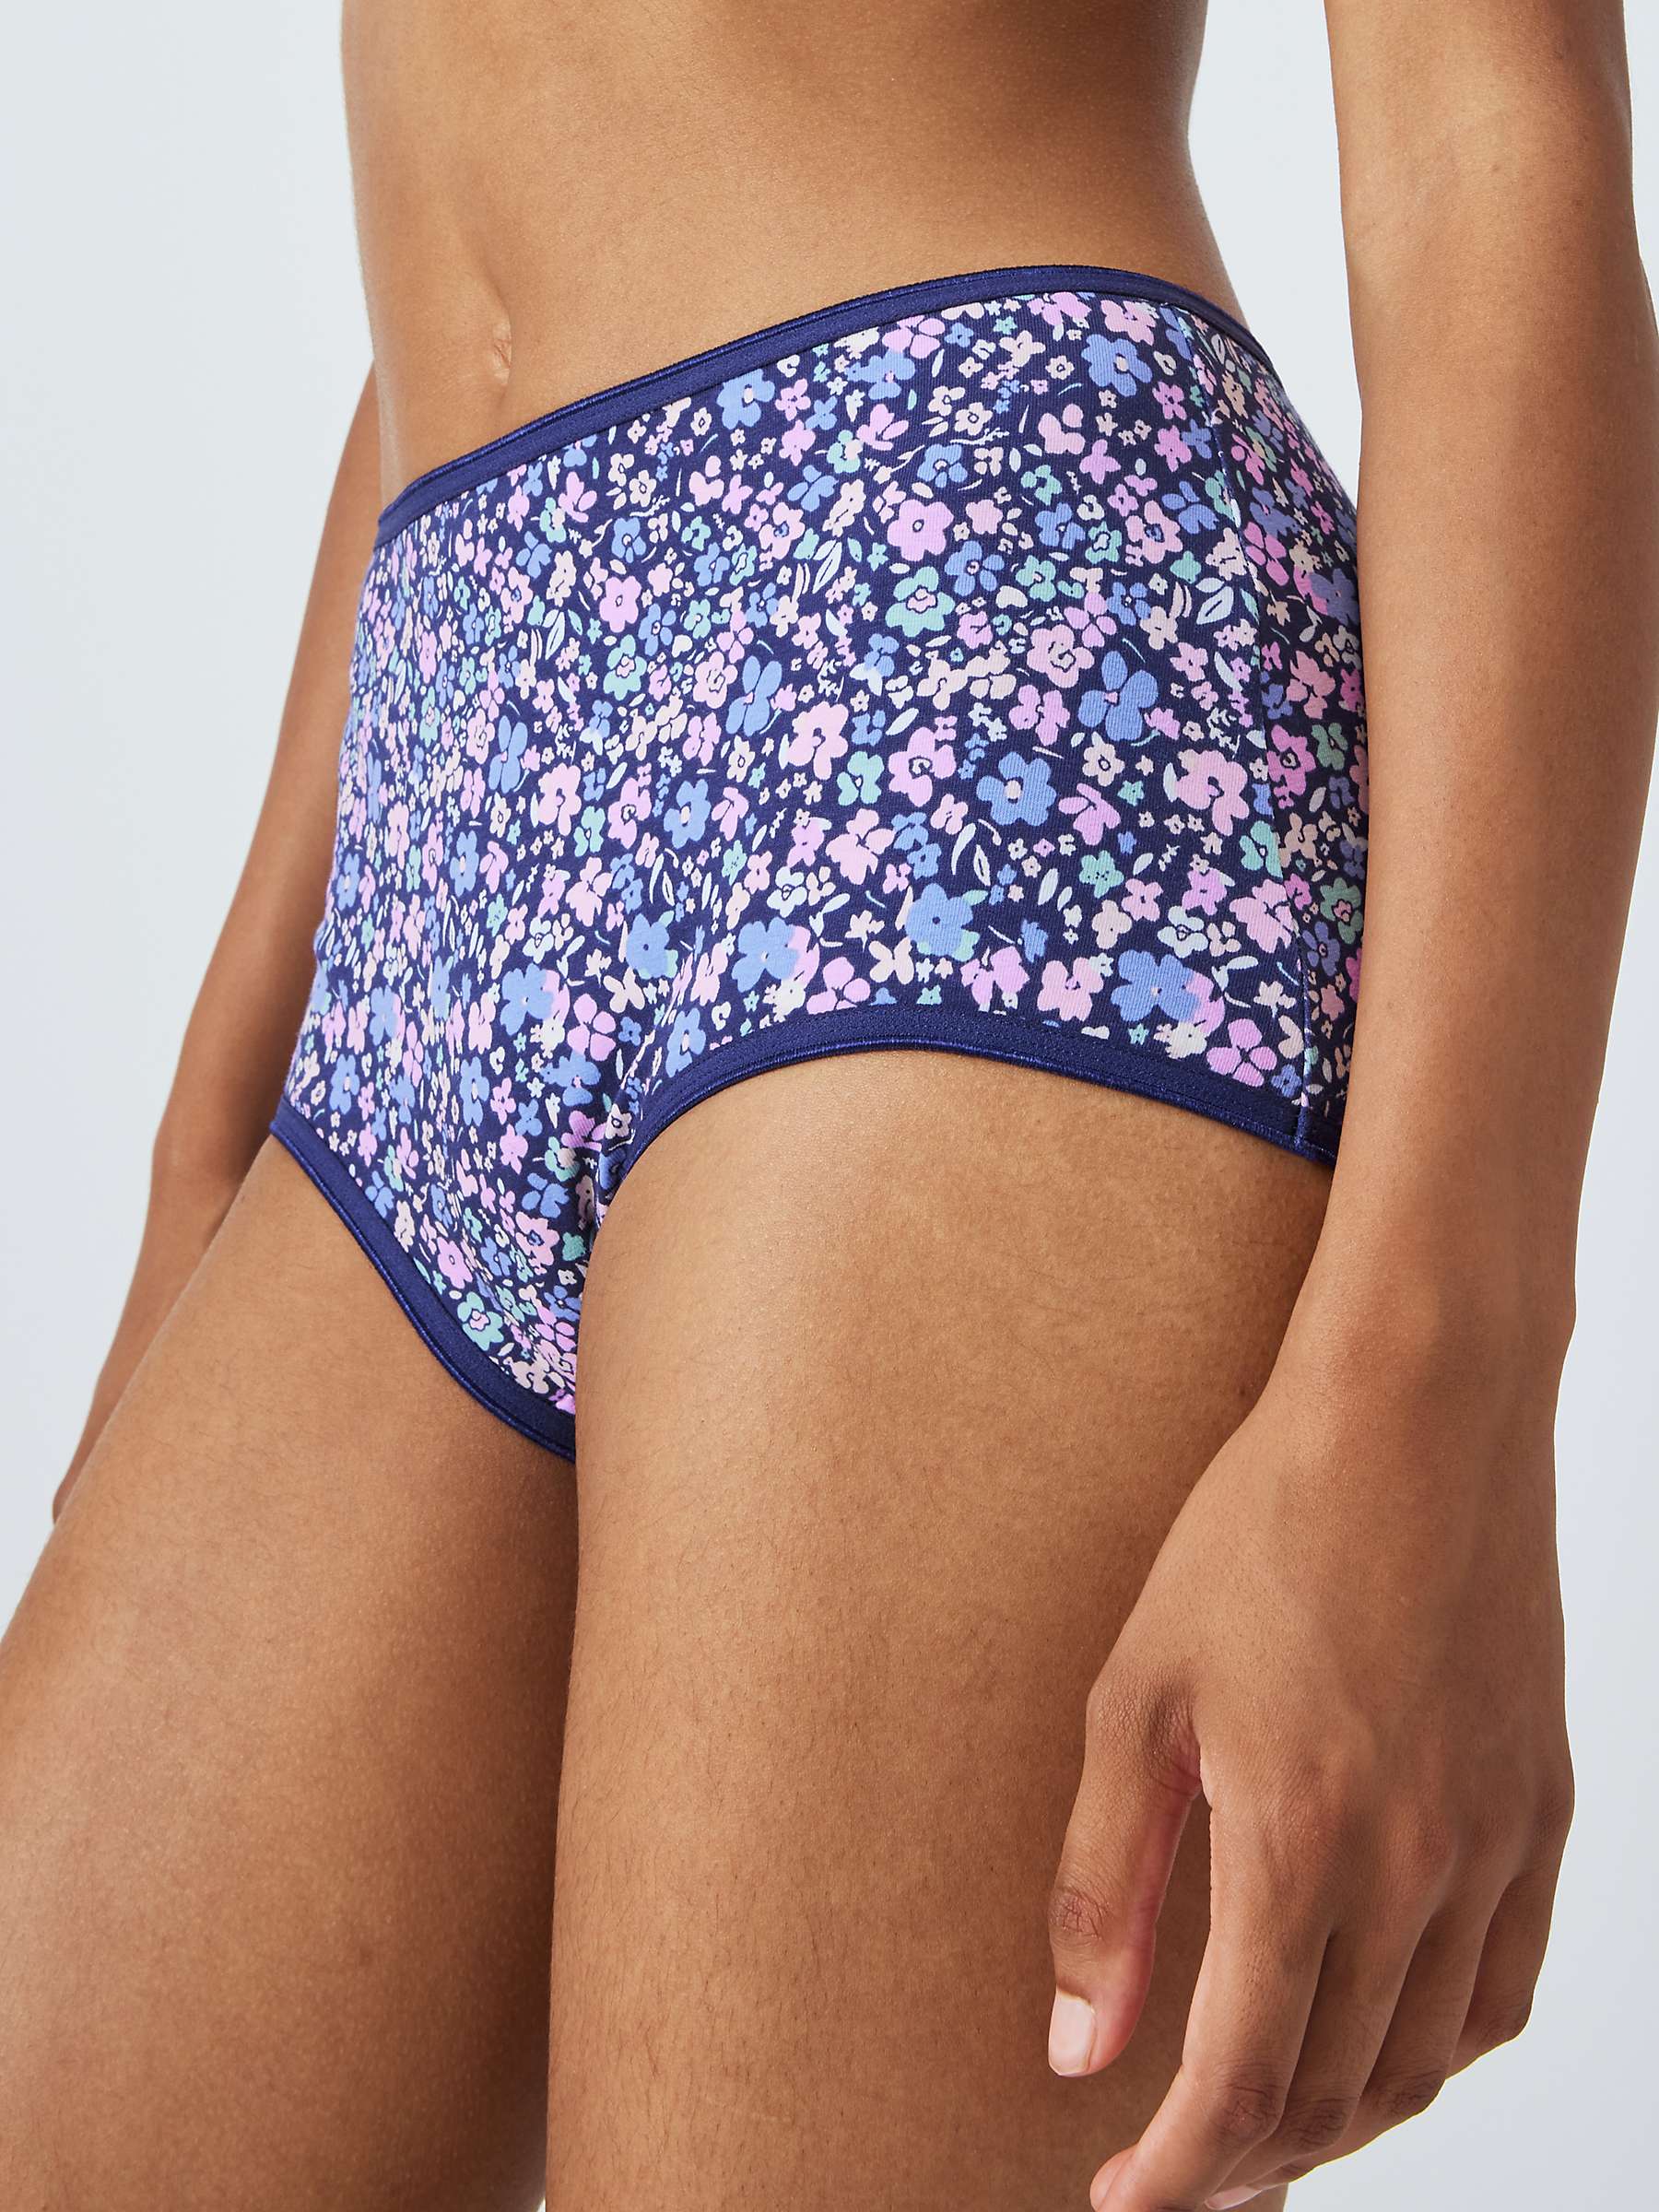 Buy John Lewis Plain and Printed Full Briefs, Pack of 5, Blue Florals Online at johnlewis.com